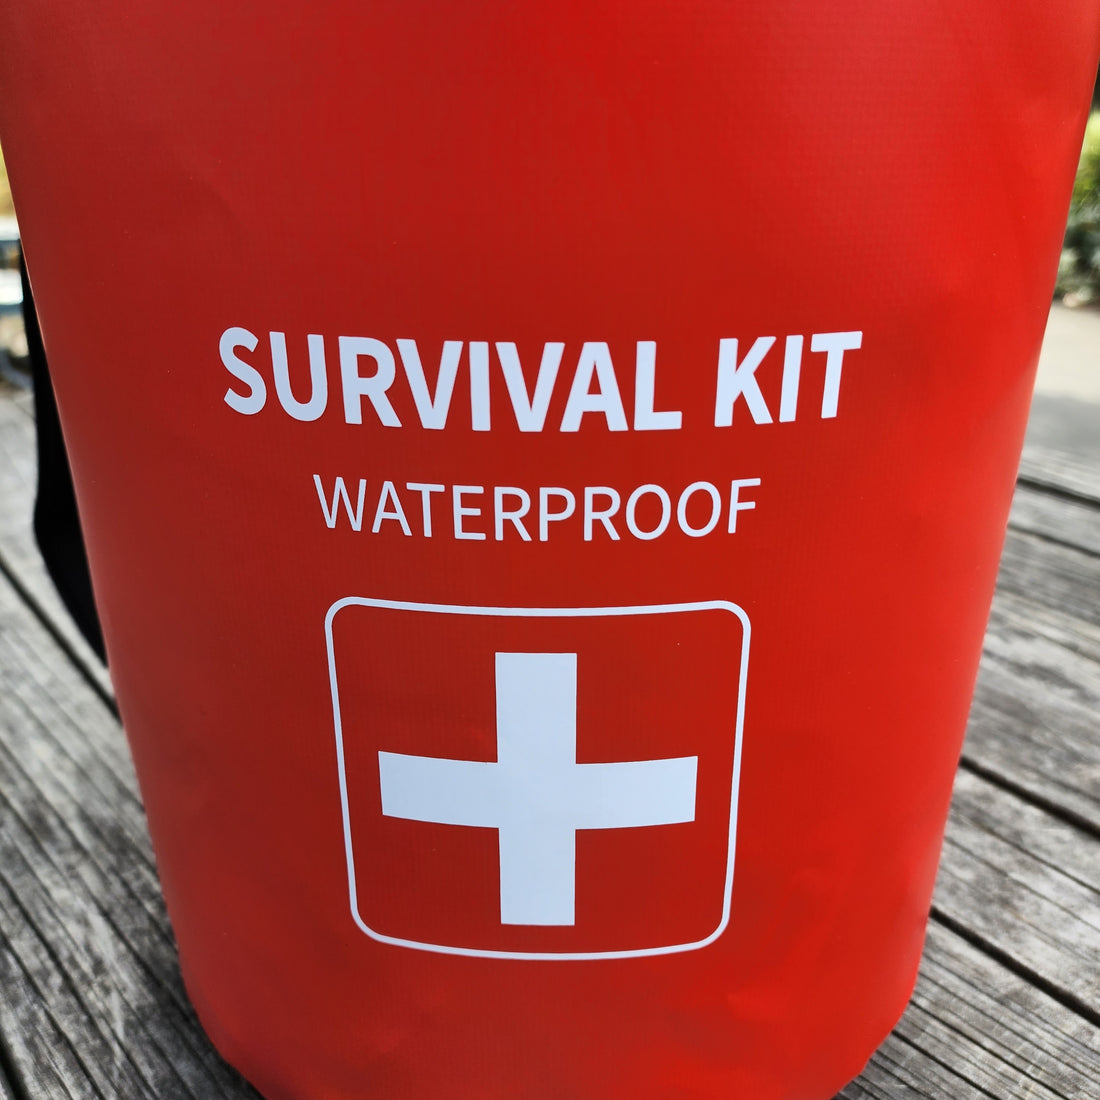 What is the purpose of a survival kit? NZ Survival Kits